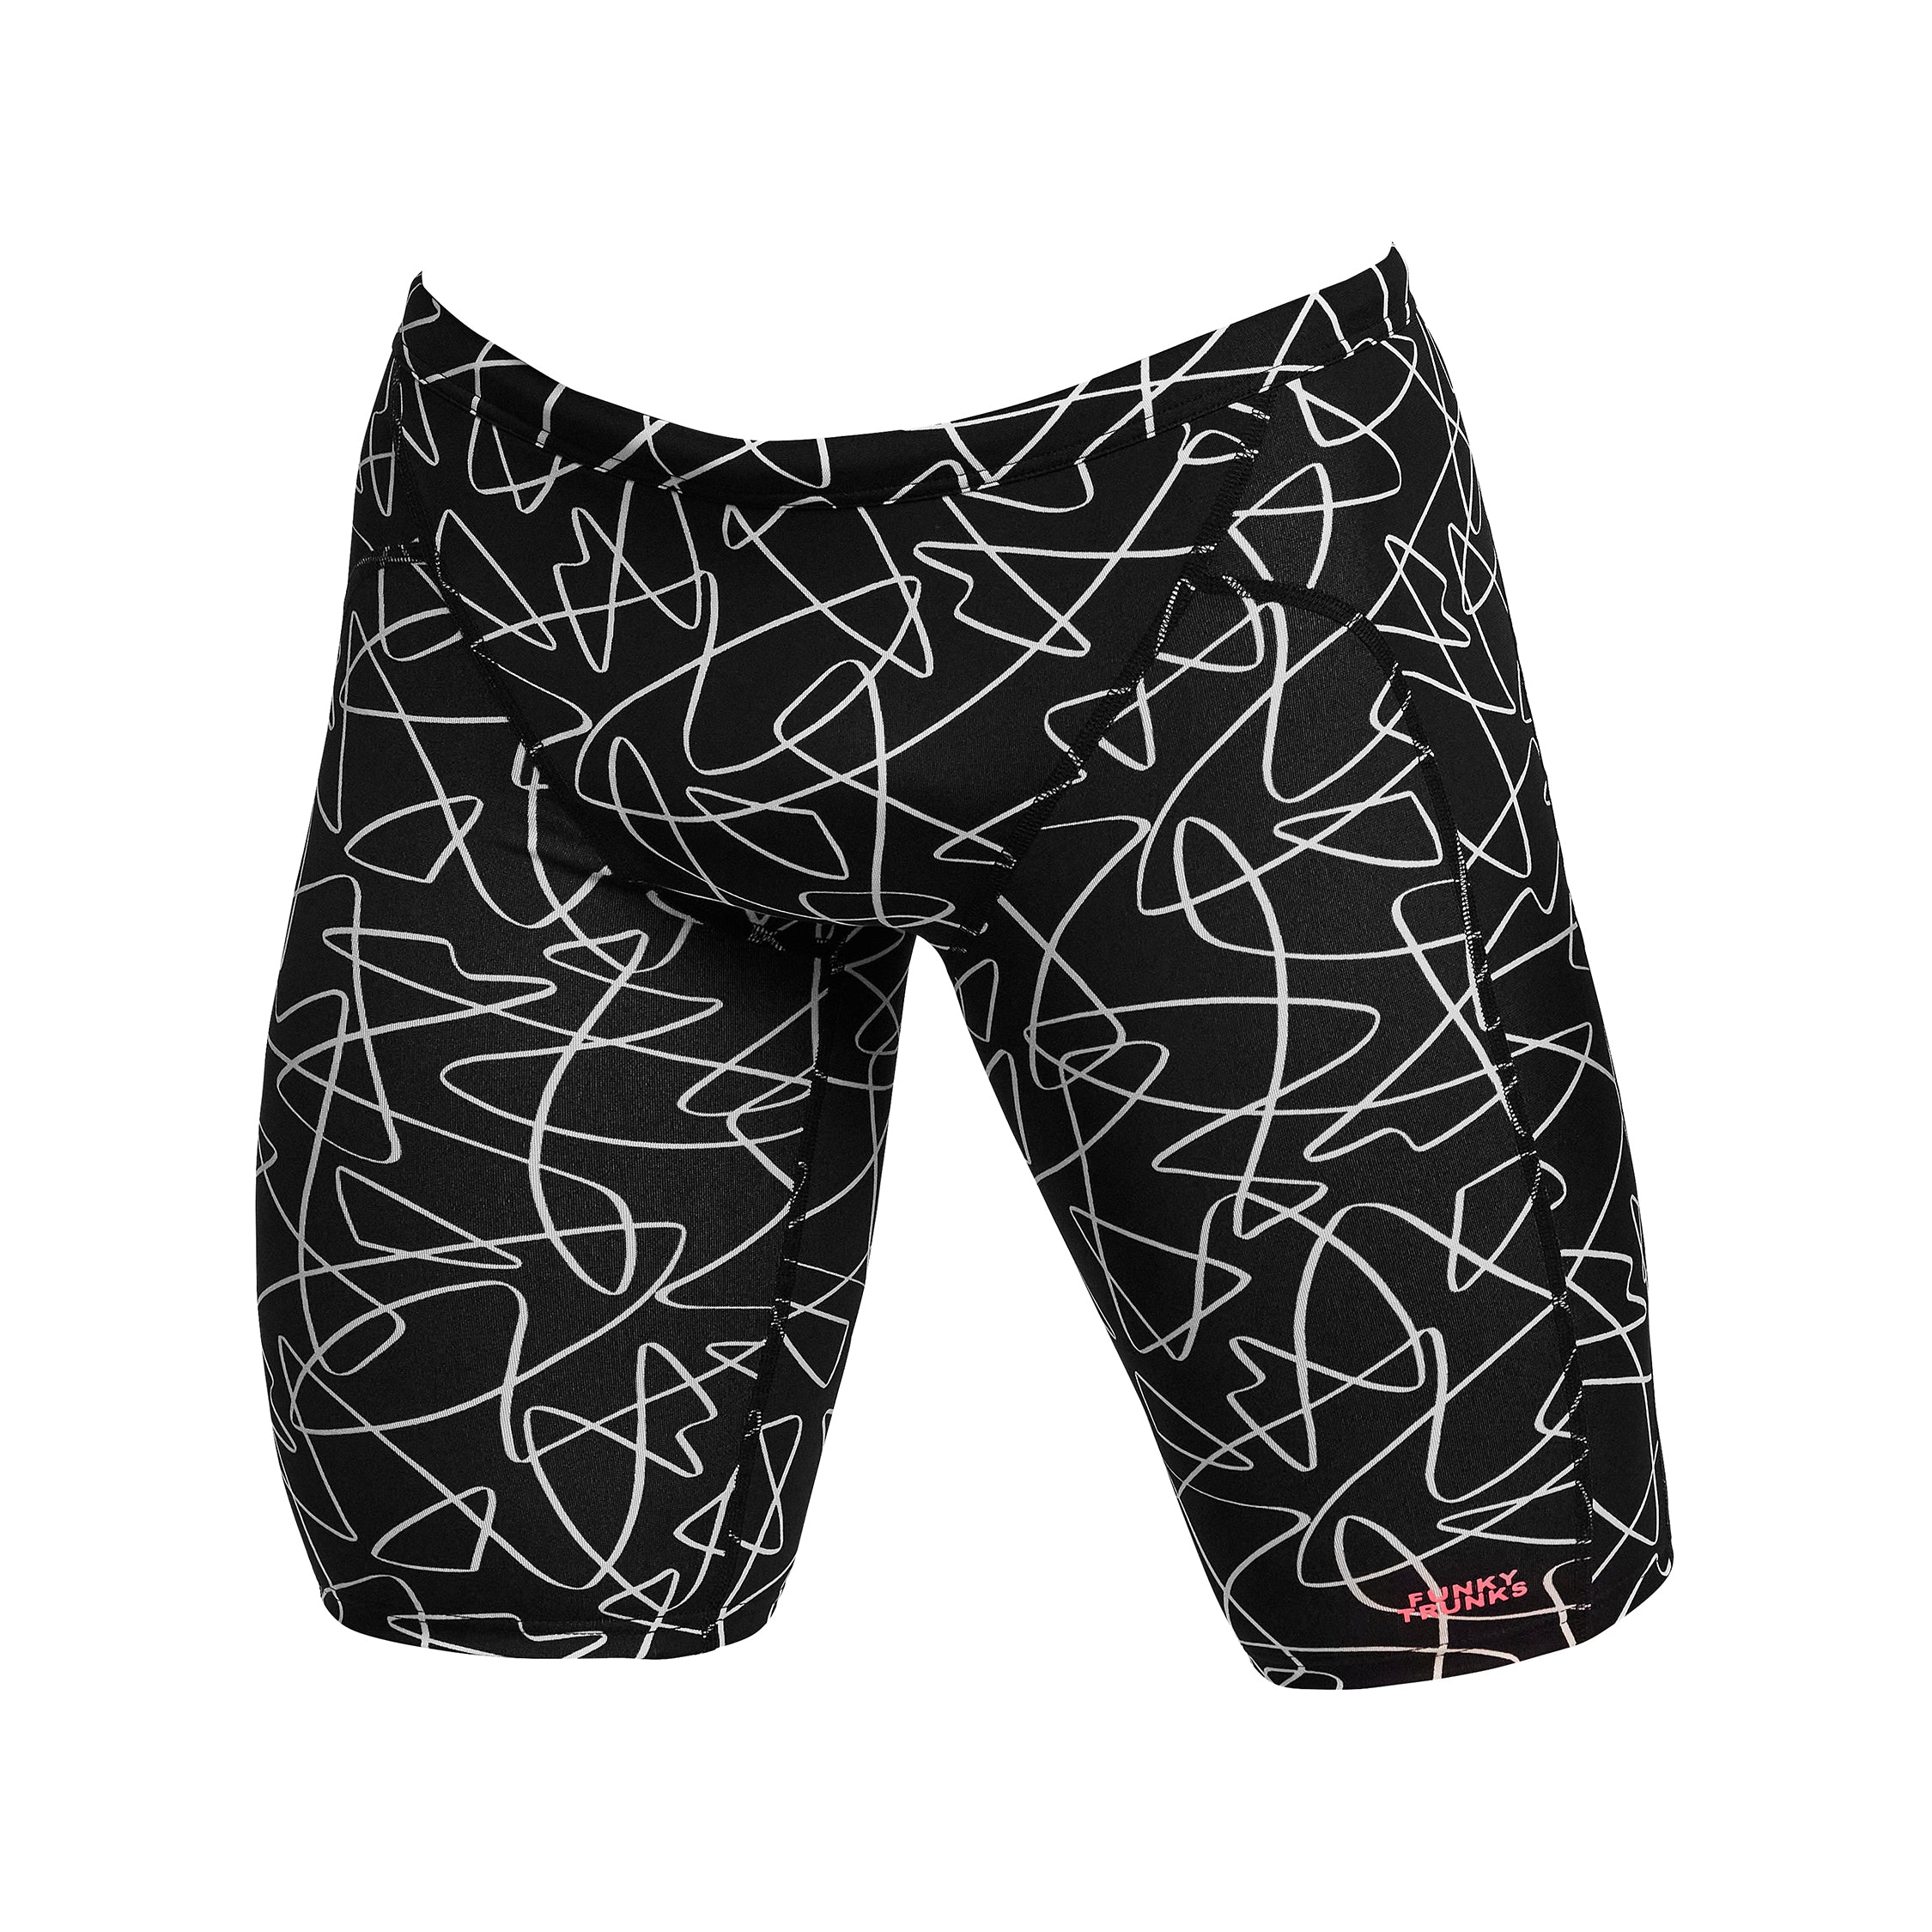 Funky Trunks Men's Training Jammers - Texta Mess